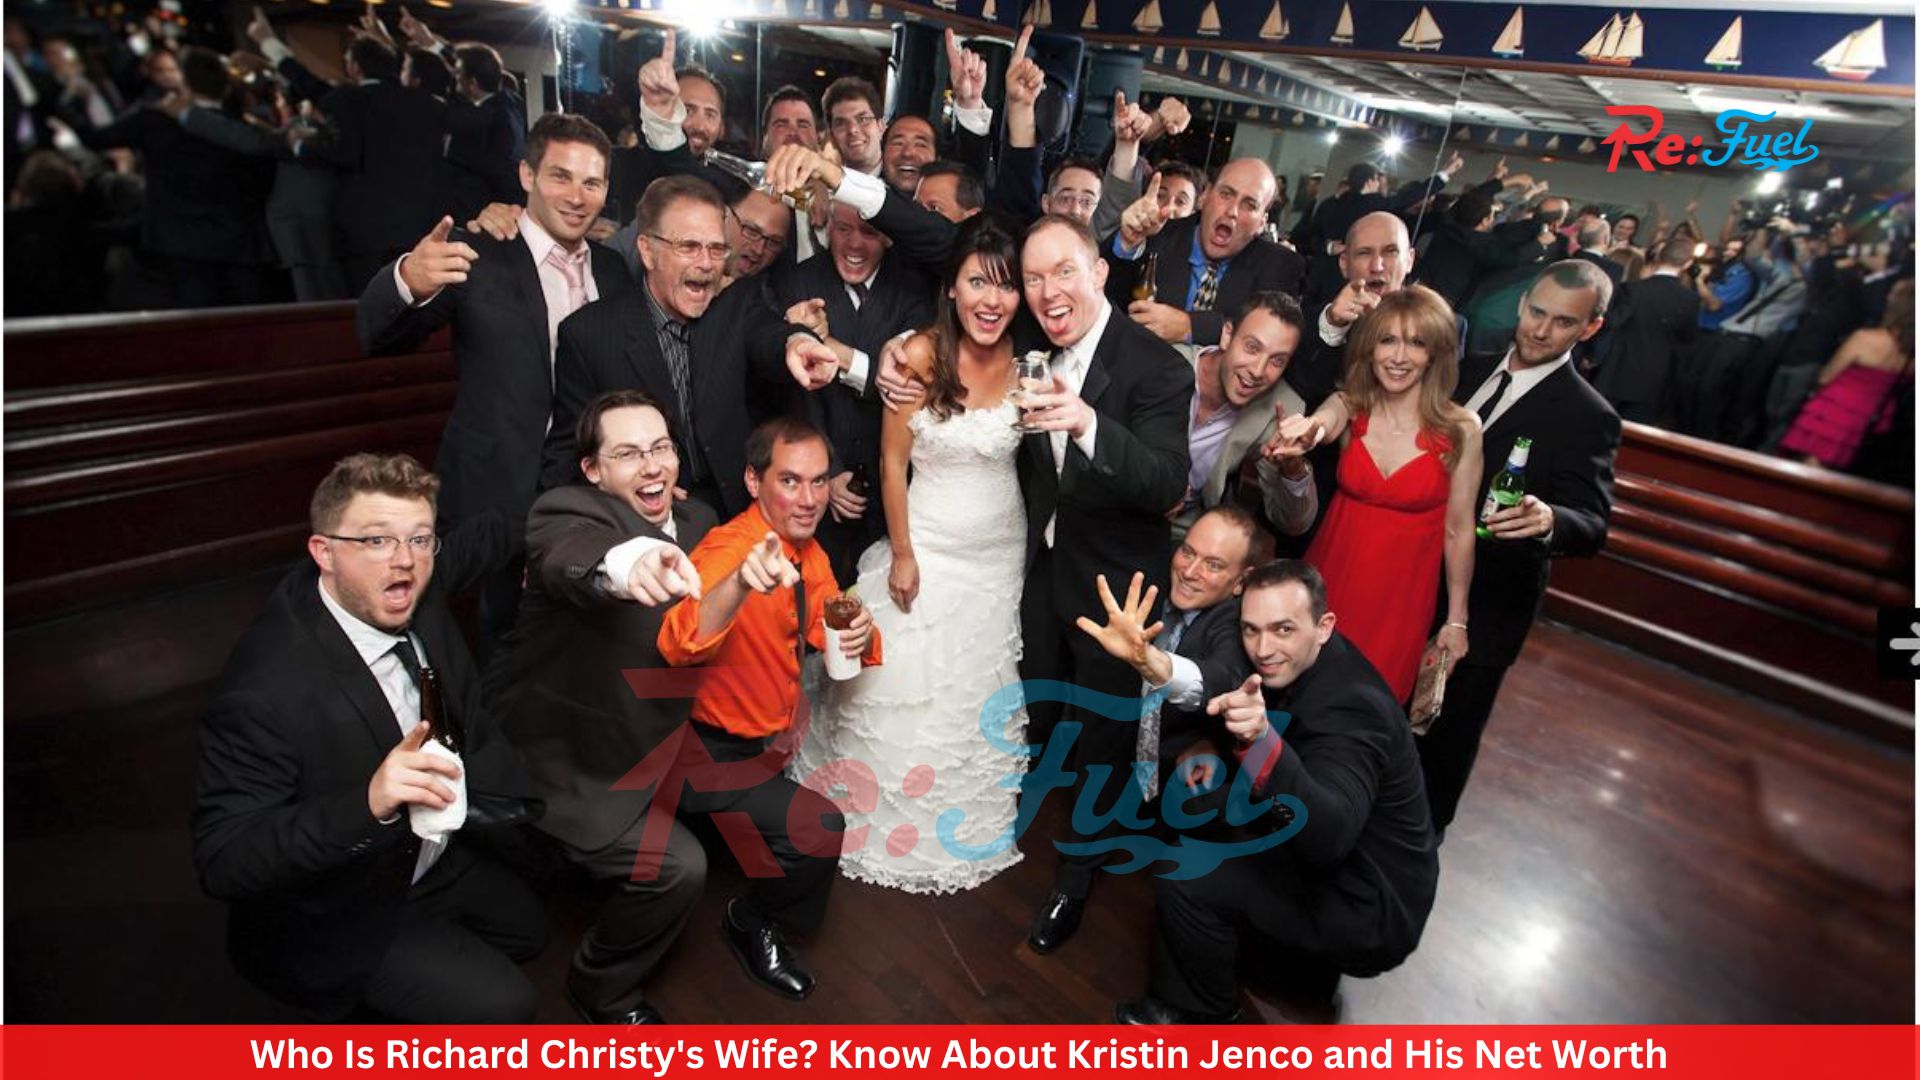 Who Is Richard Christy's Wife? Know About Kristin Jenco and His Net Worth